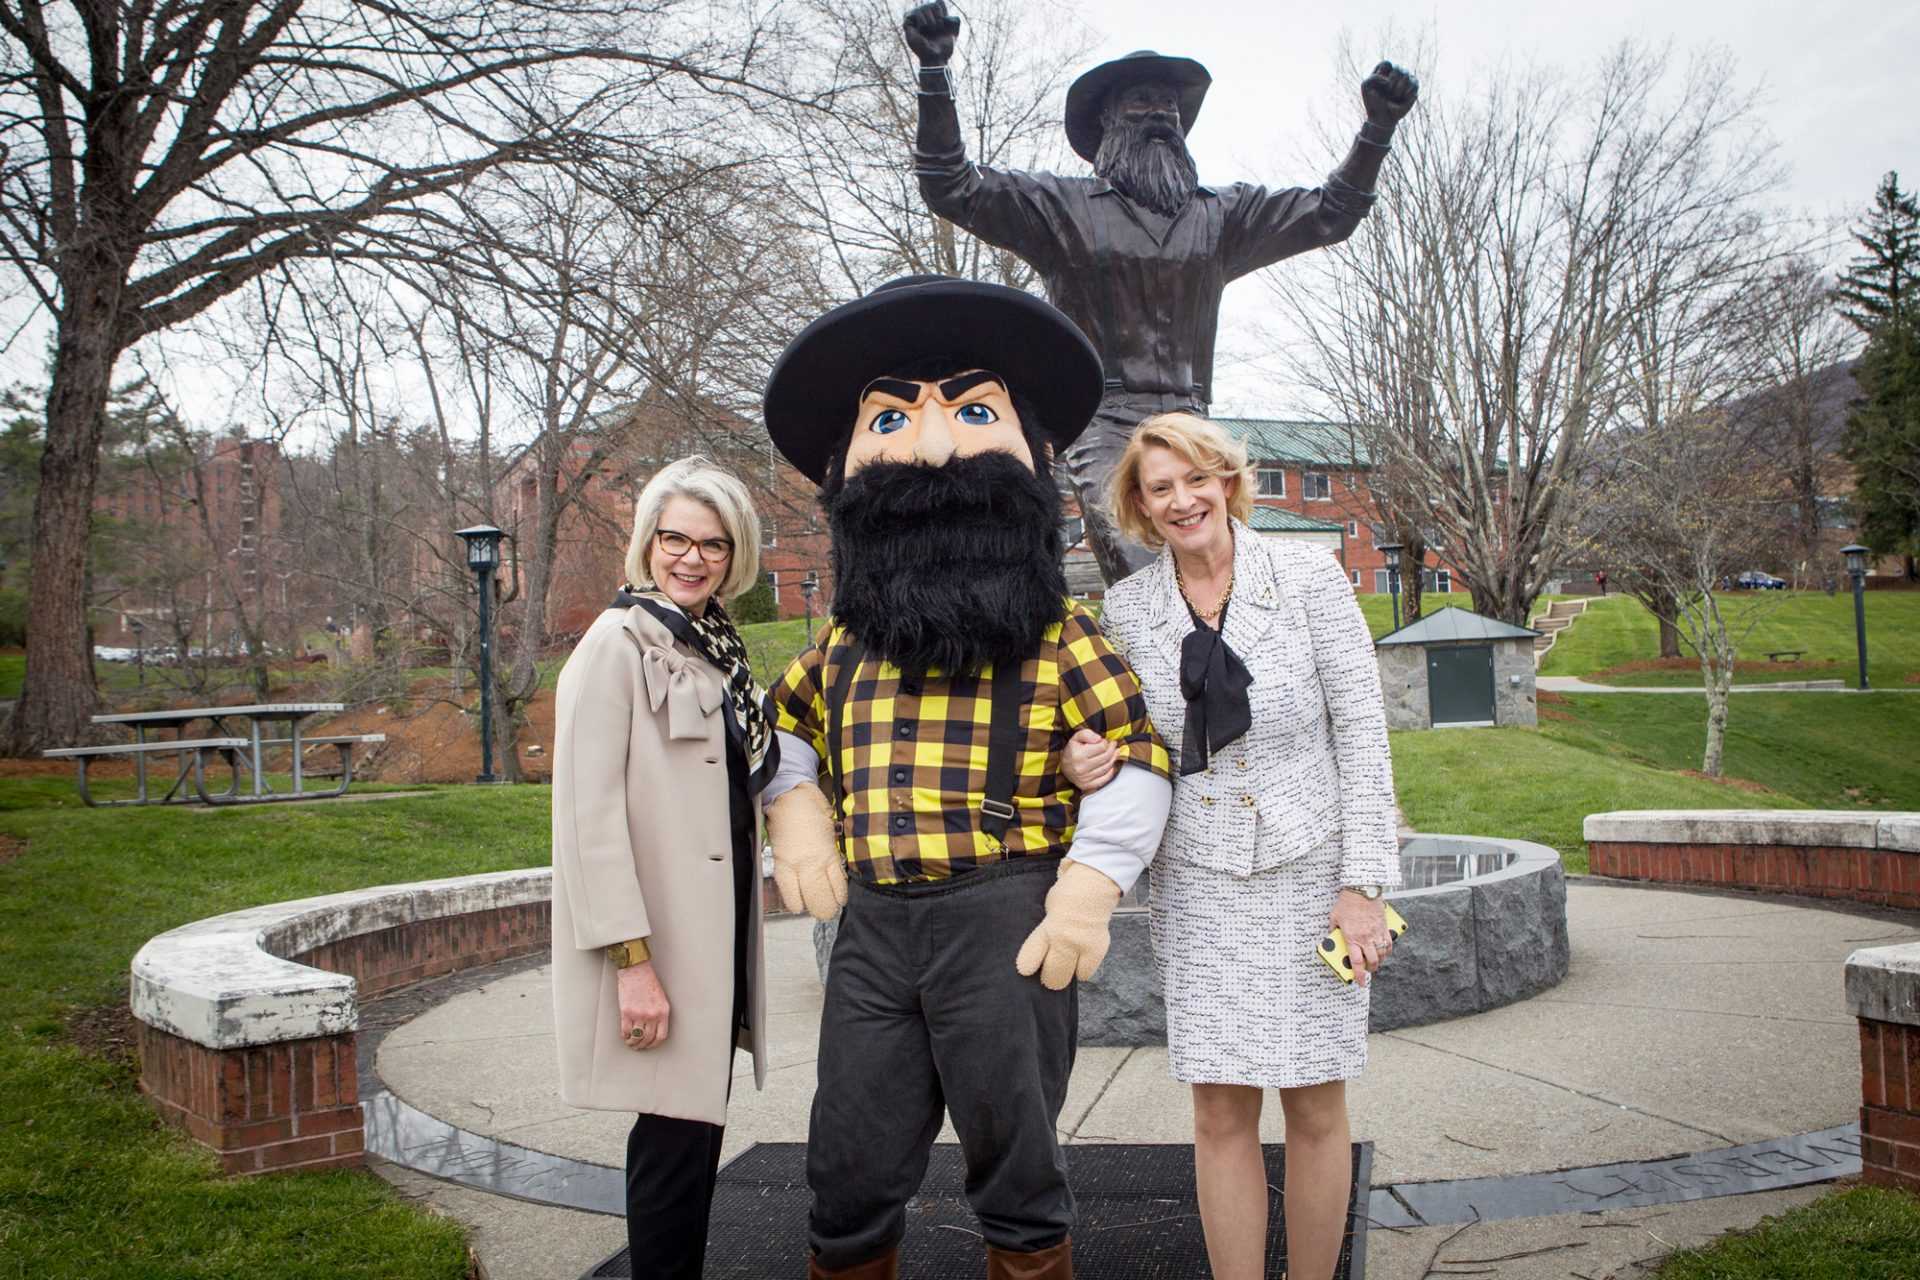 University of North Carolina System President Margaret Spellings and Chancellor Everts stand in front of the Yosef statue with Yosef.